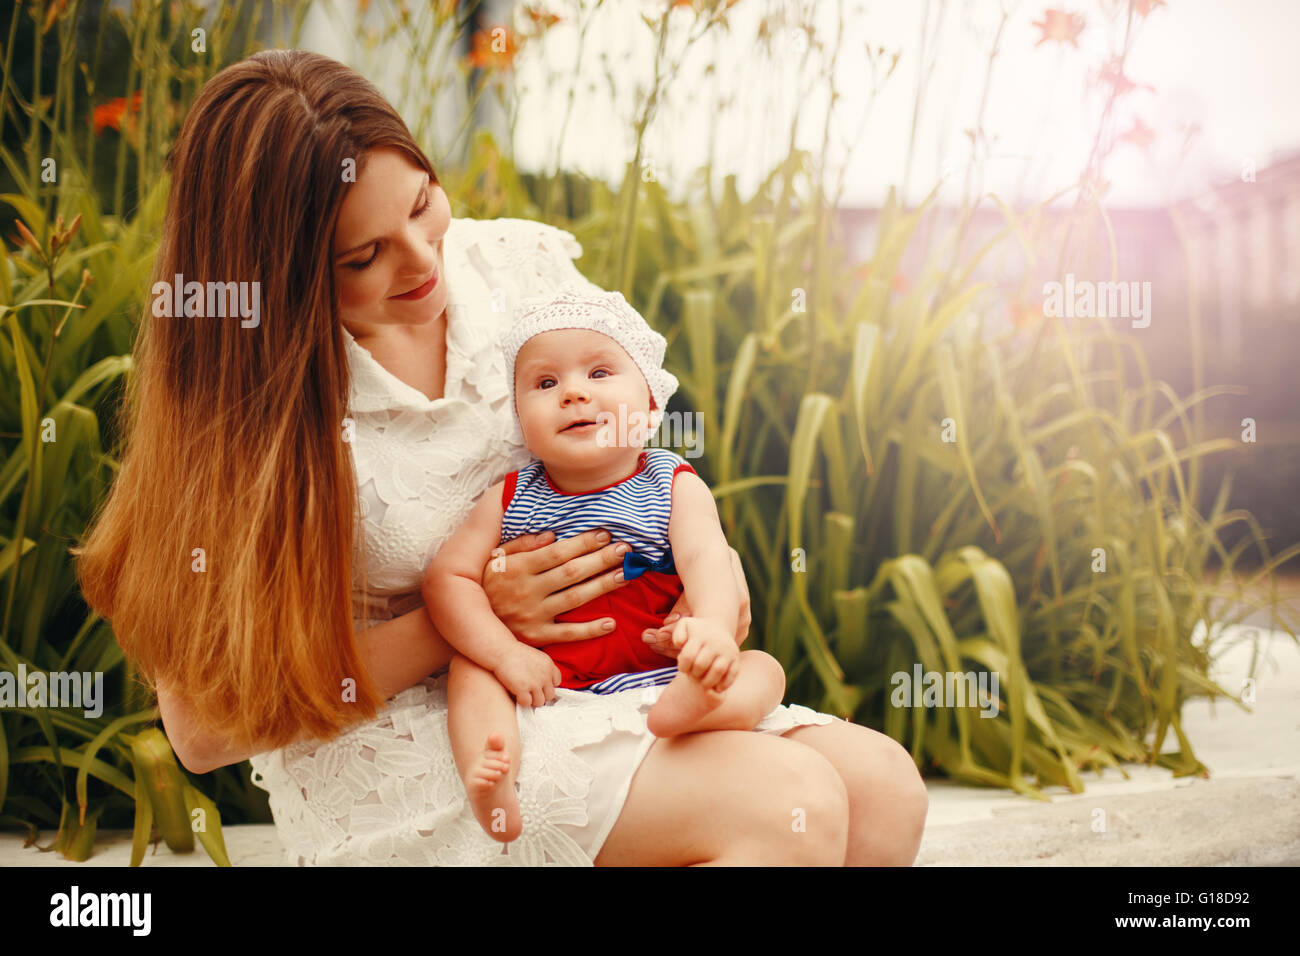 Cute Happy Toddler Sitting on Loving Mother`s Knees and Smiling. Family Fun. Image Toned with Warm Colors. Stock Photo